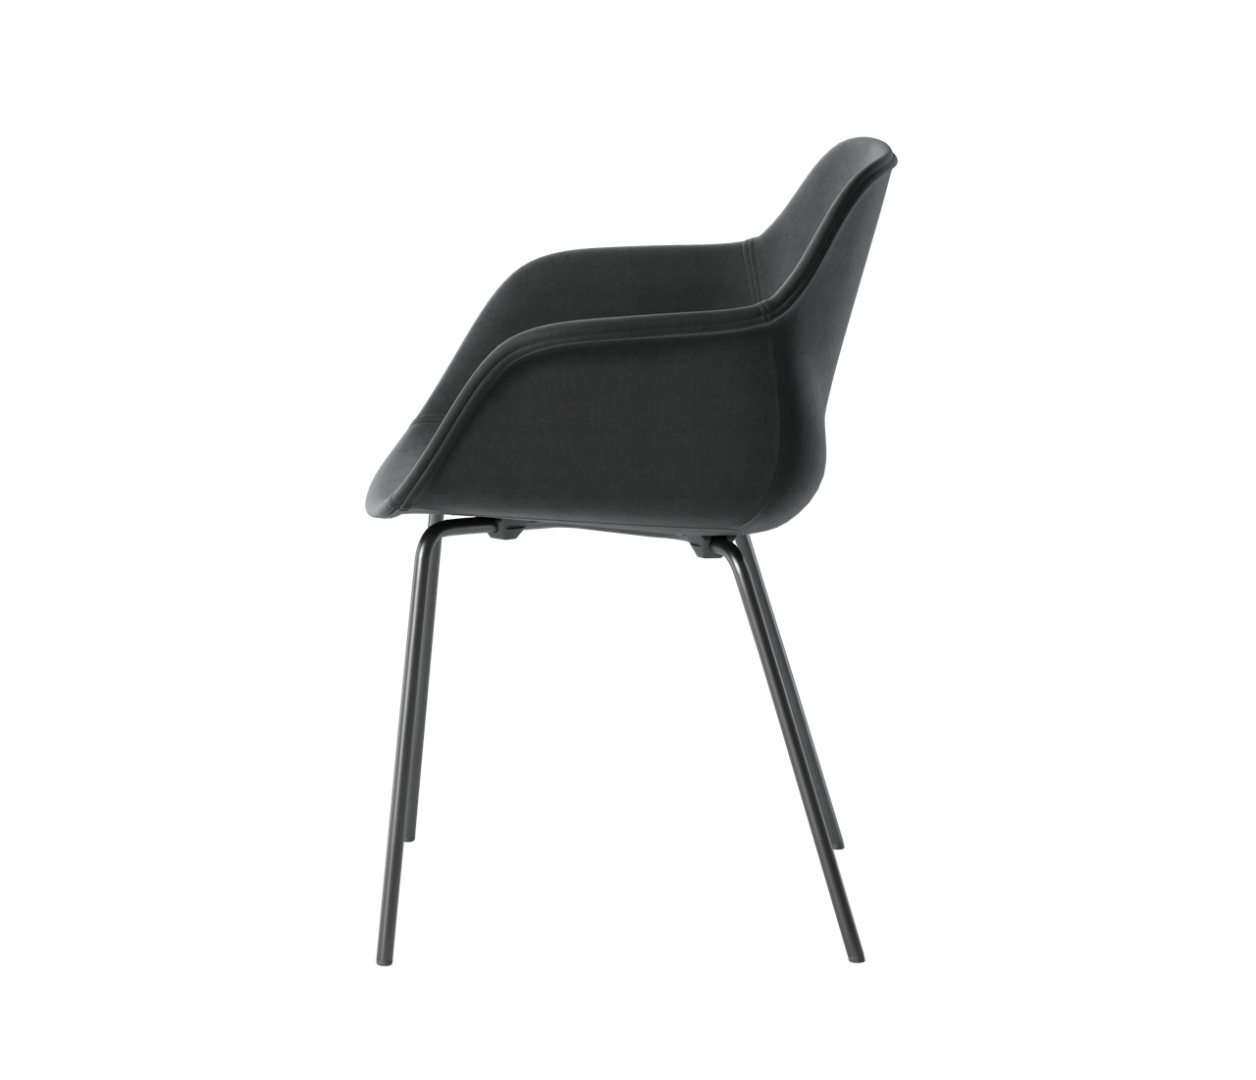 OCEE&FOUR – Chairs – FourMe 44 – Plastic Shell - Fully Upholstered - Packshot Image 4 Large